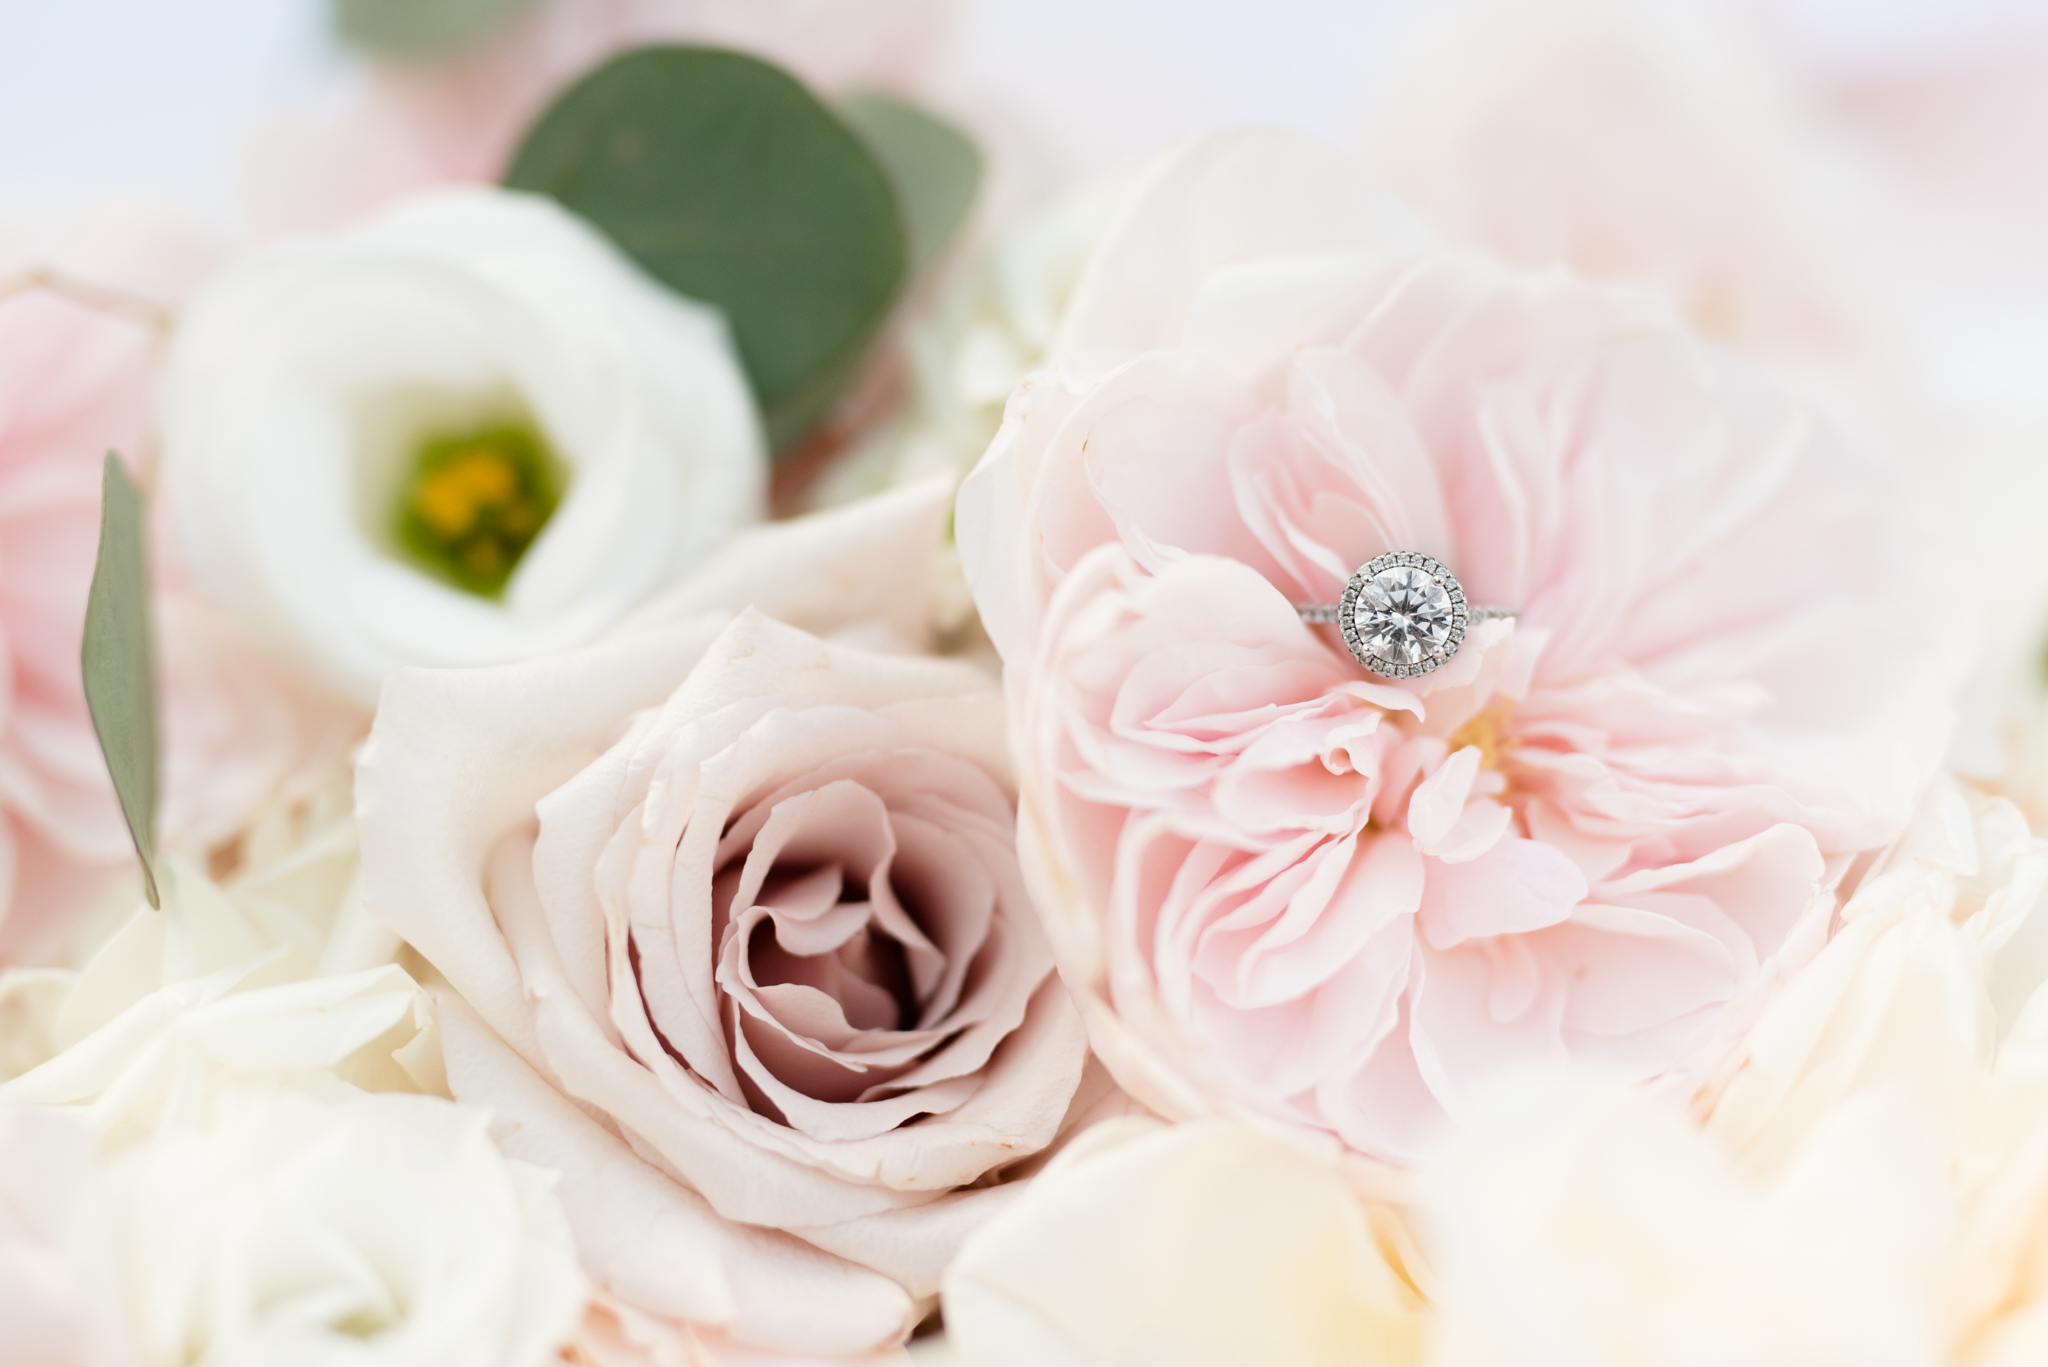 Engagement ring sits with pink flowers.